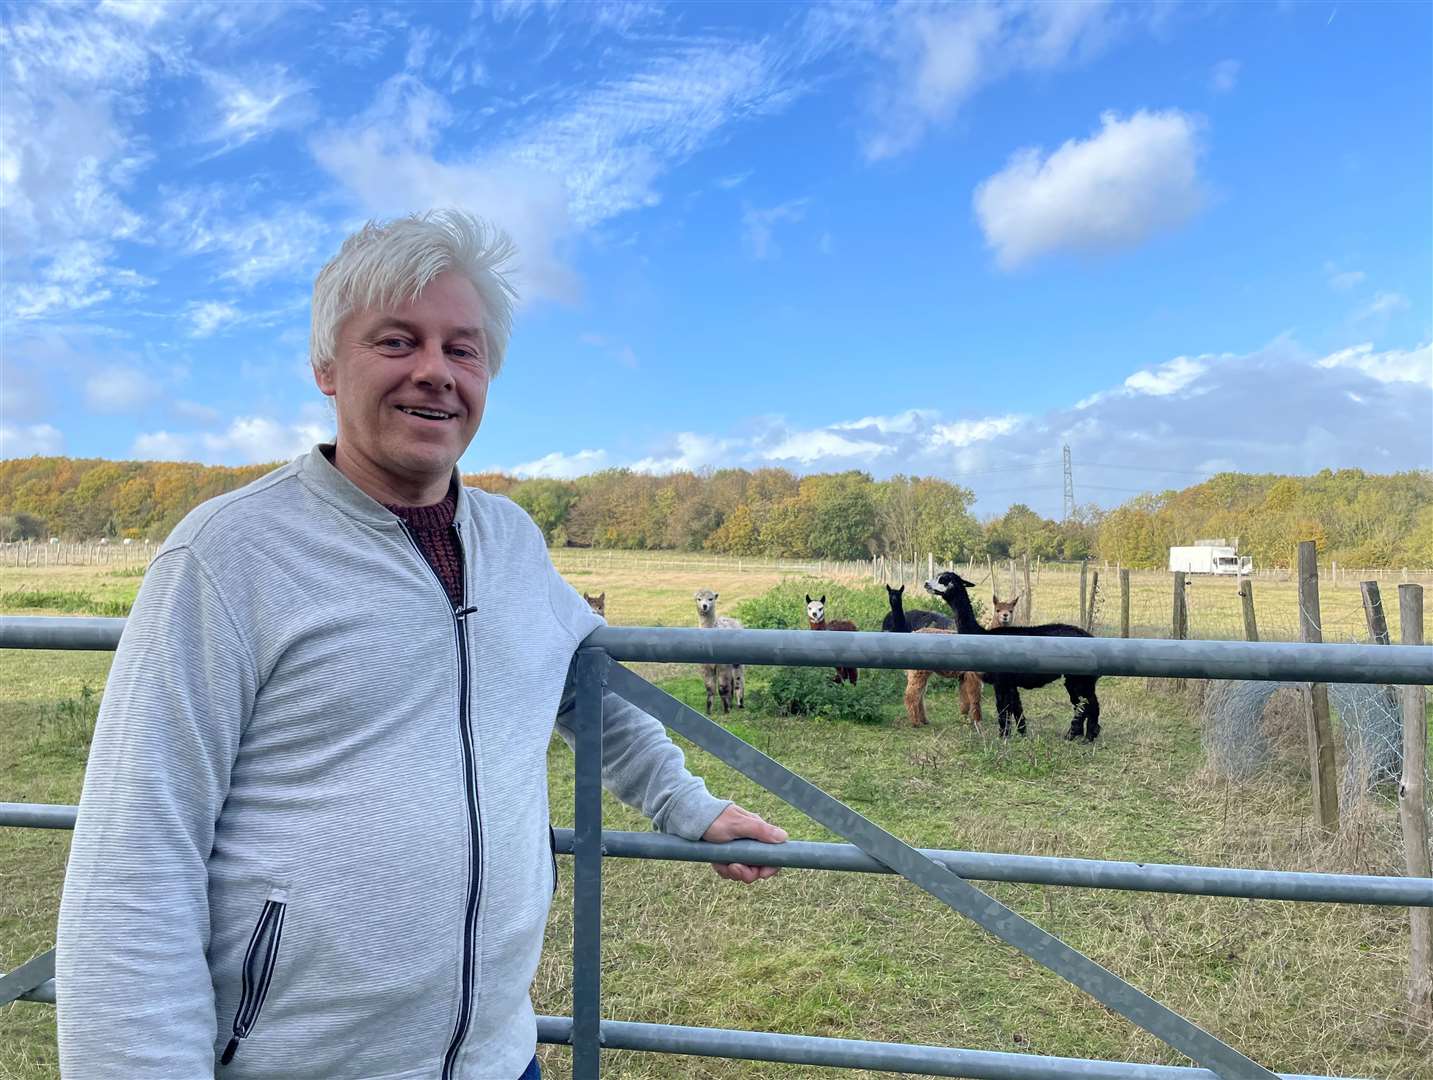 Bogumil Kusiba is now living in an Airbnb at an alpaca farm in Hartlip